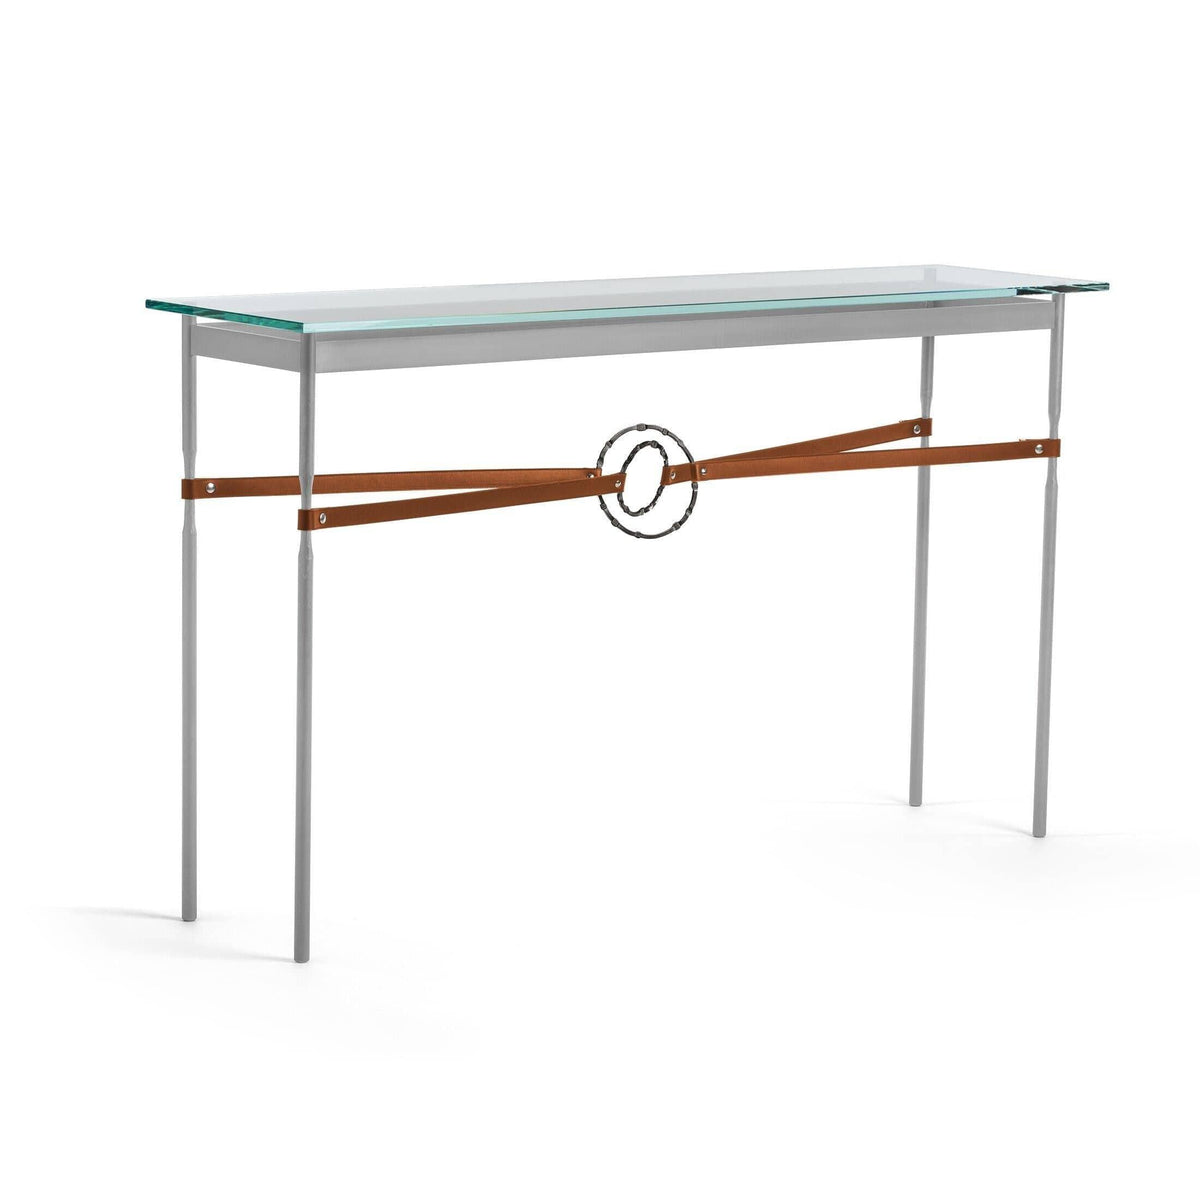 Hubbardton Forge - Equus Chestnut Leather Console Table - 750118-82-07-LC-VA0714 | Montreal Lighting & Hardware